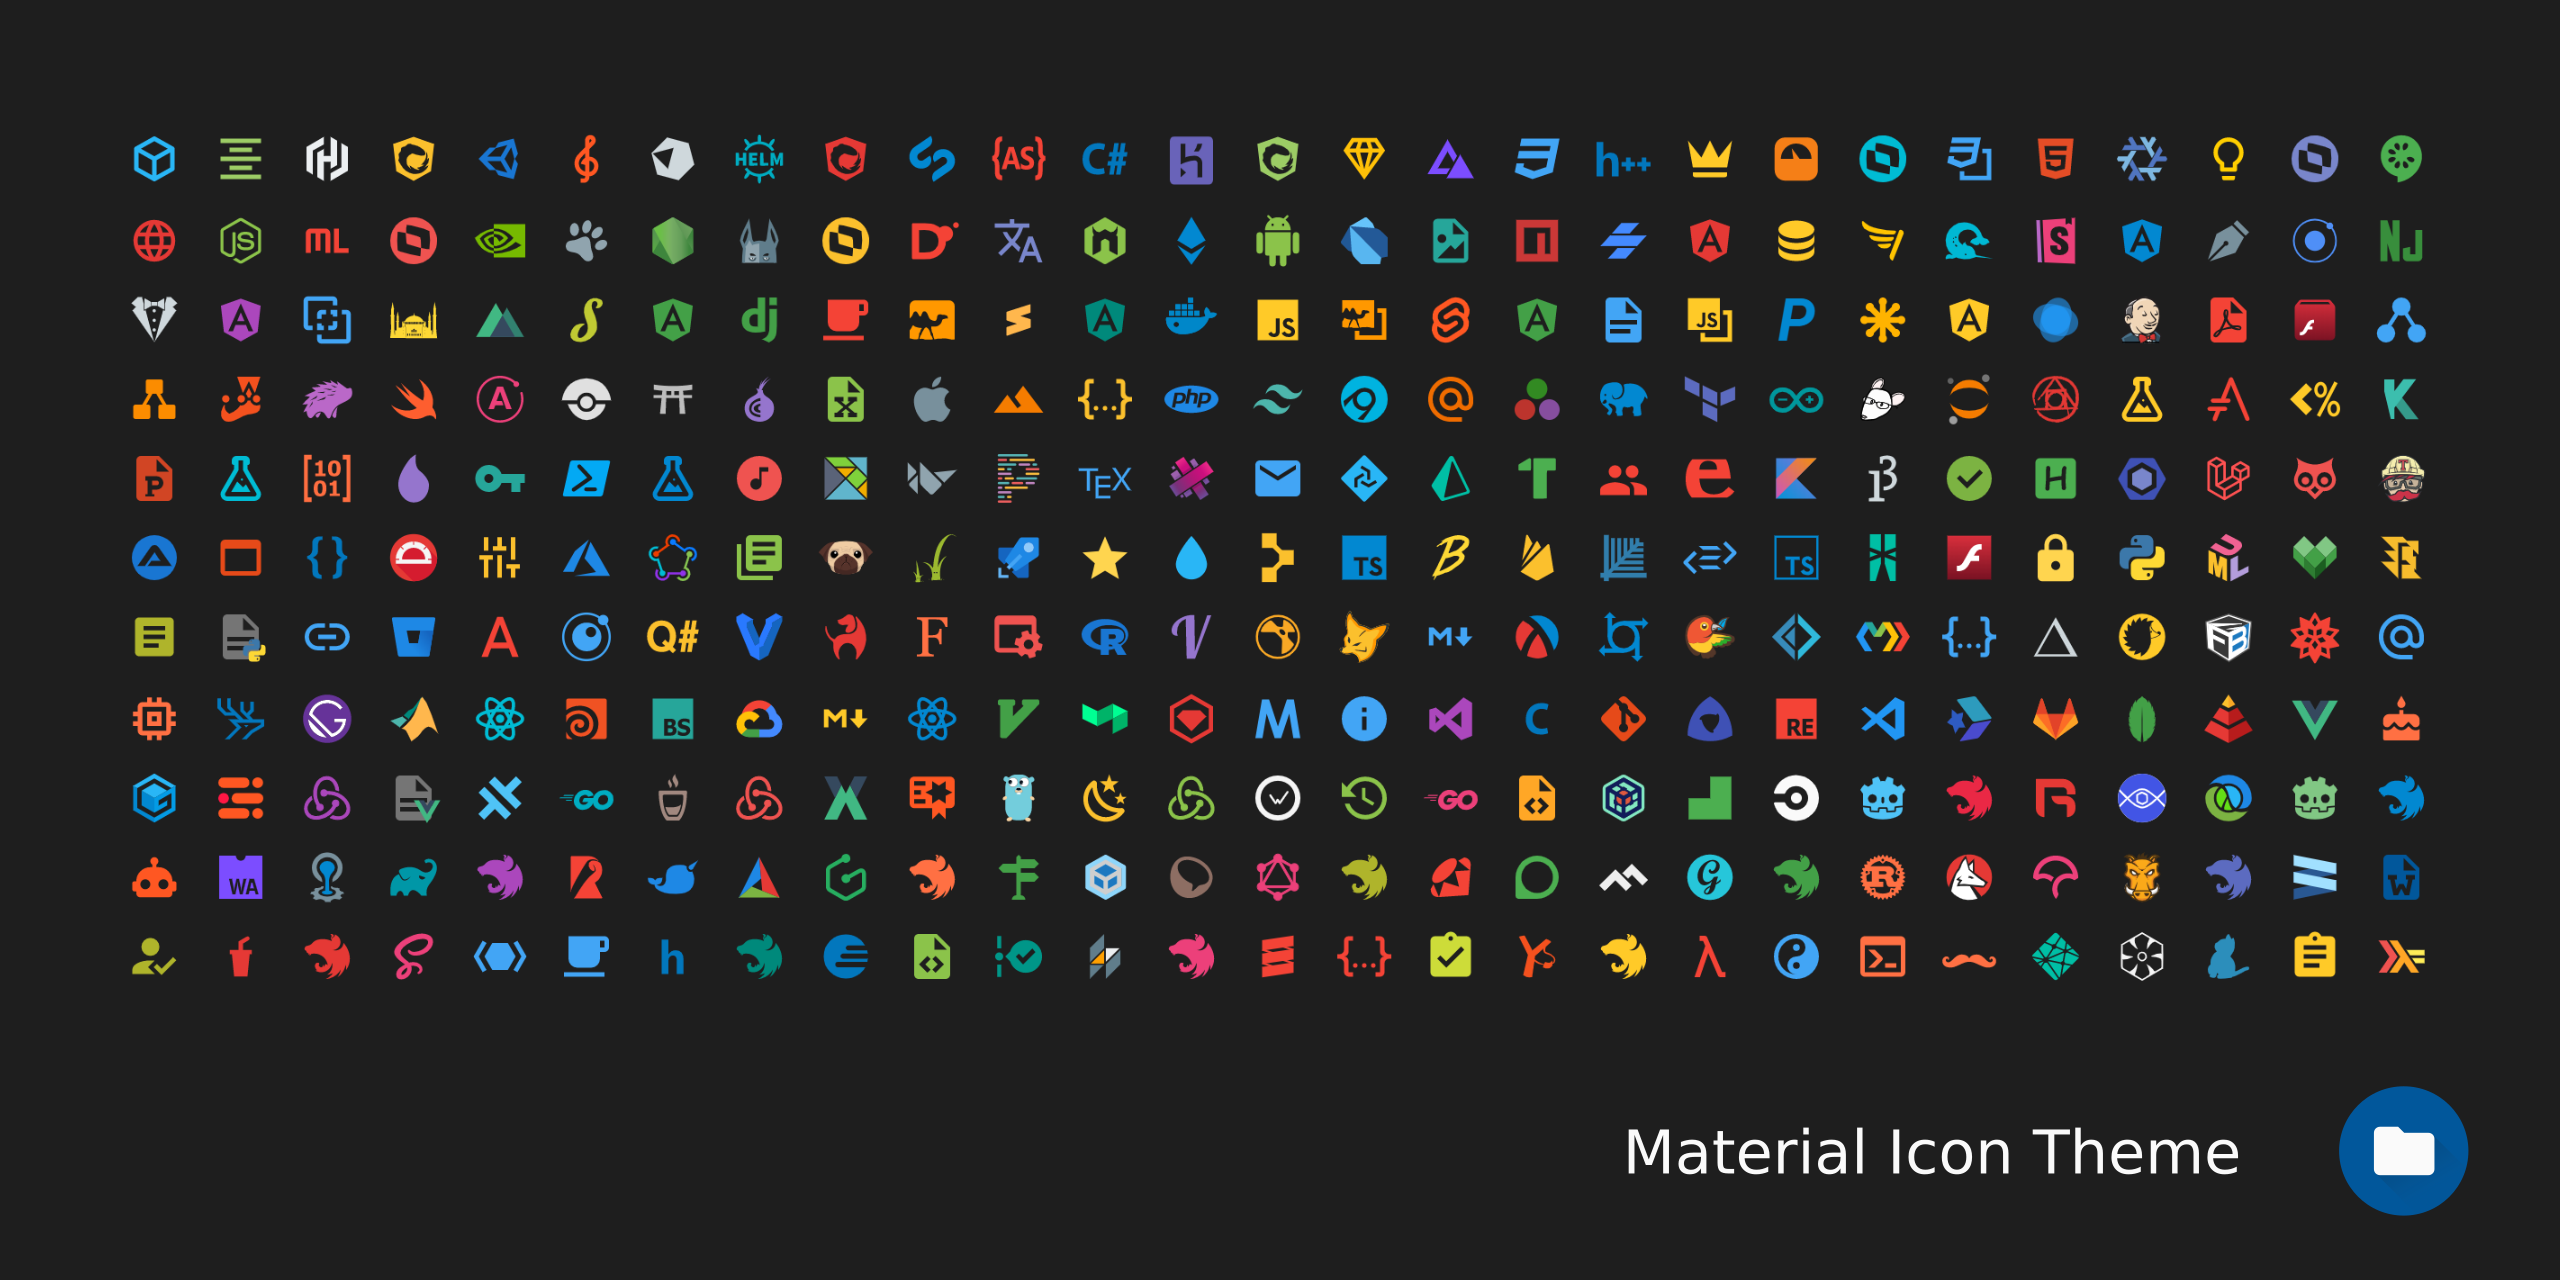 vscode-material-icon-theme